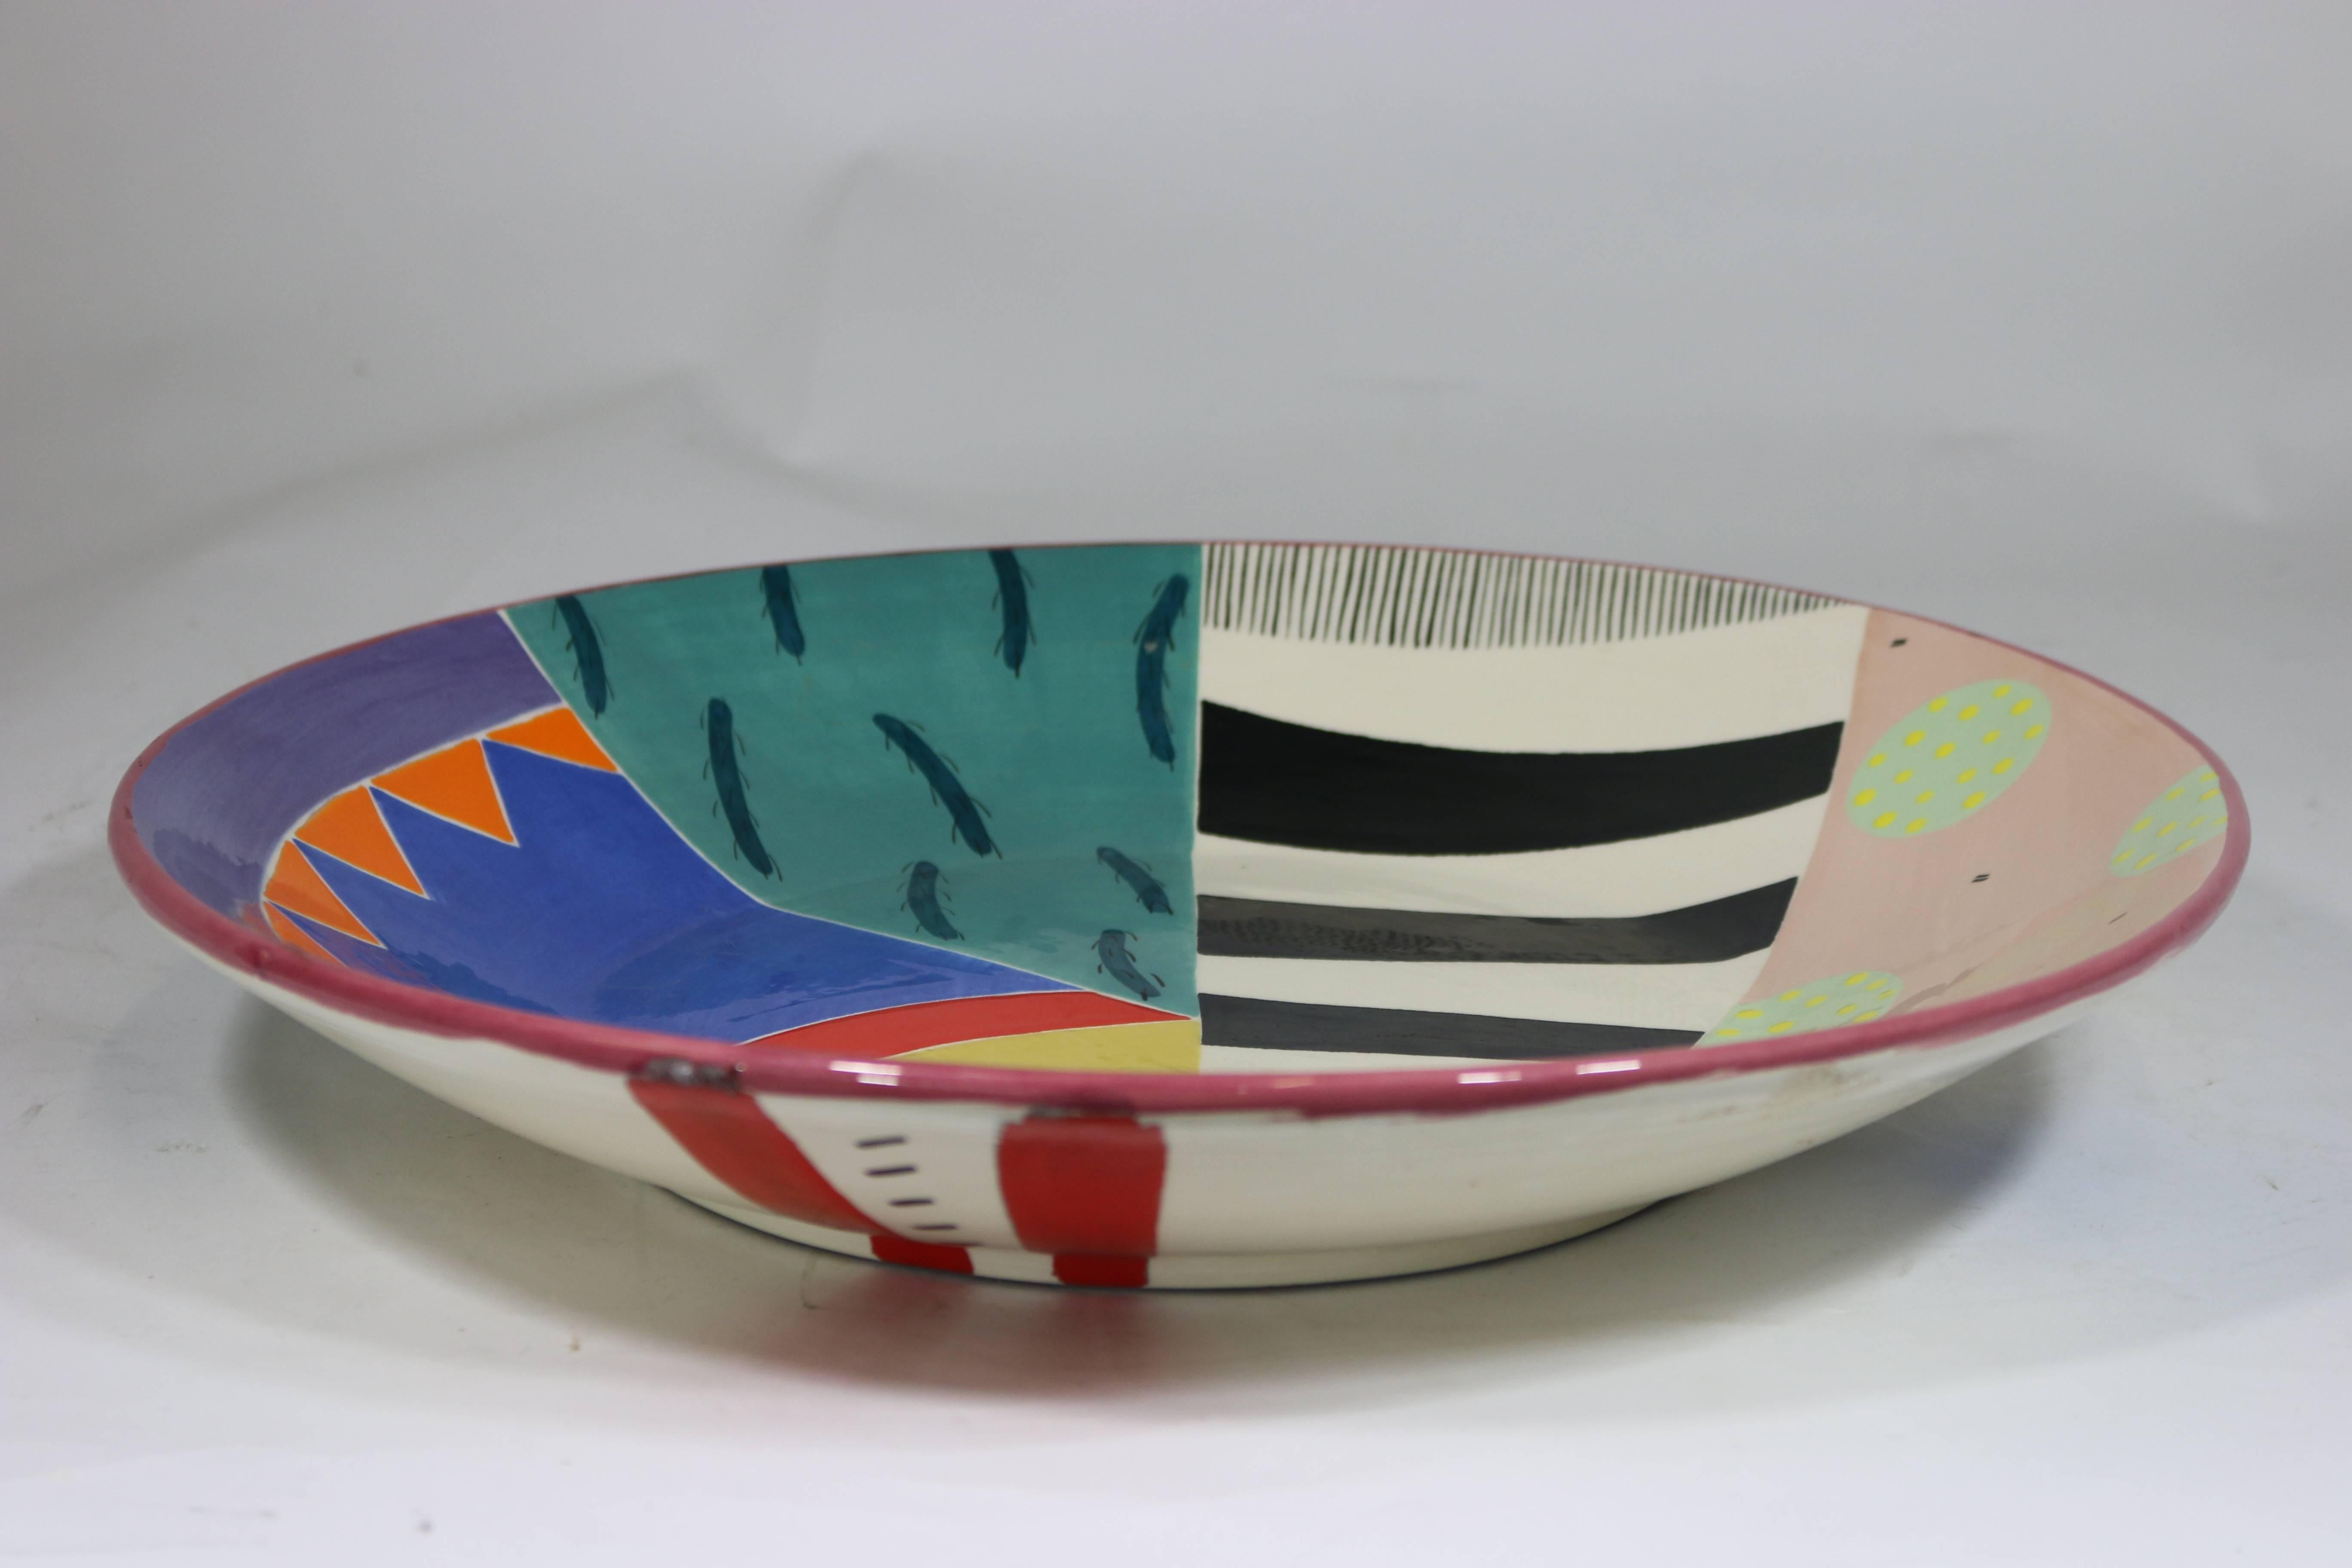 Huge Vintage Postmodernist design handcrafted one of a kind art ceramic pottery bowl by American noted Luxe San Francisco artist Susan Eslick, signed SFCA Eslick and dated 1988. As a great display piece on the wall or in a display stand or use to